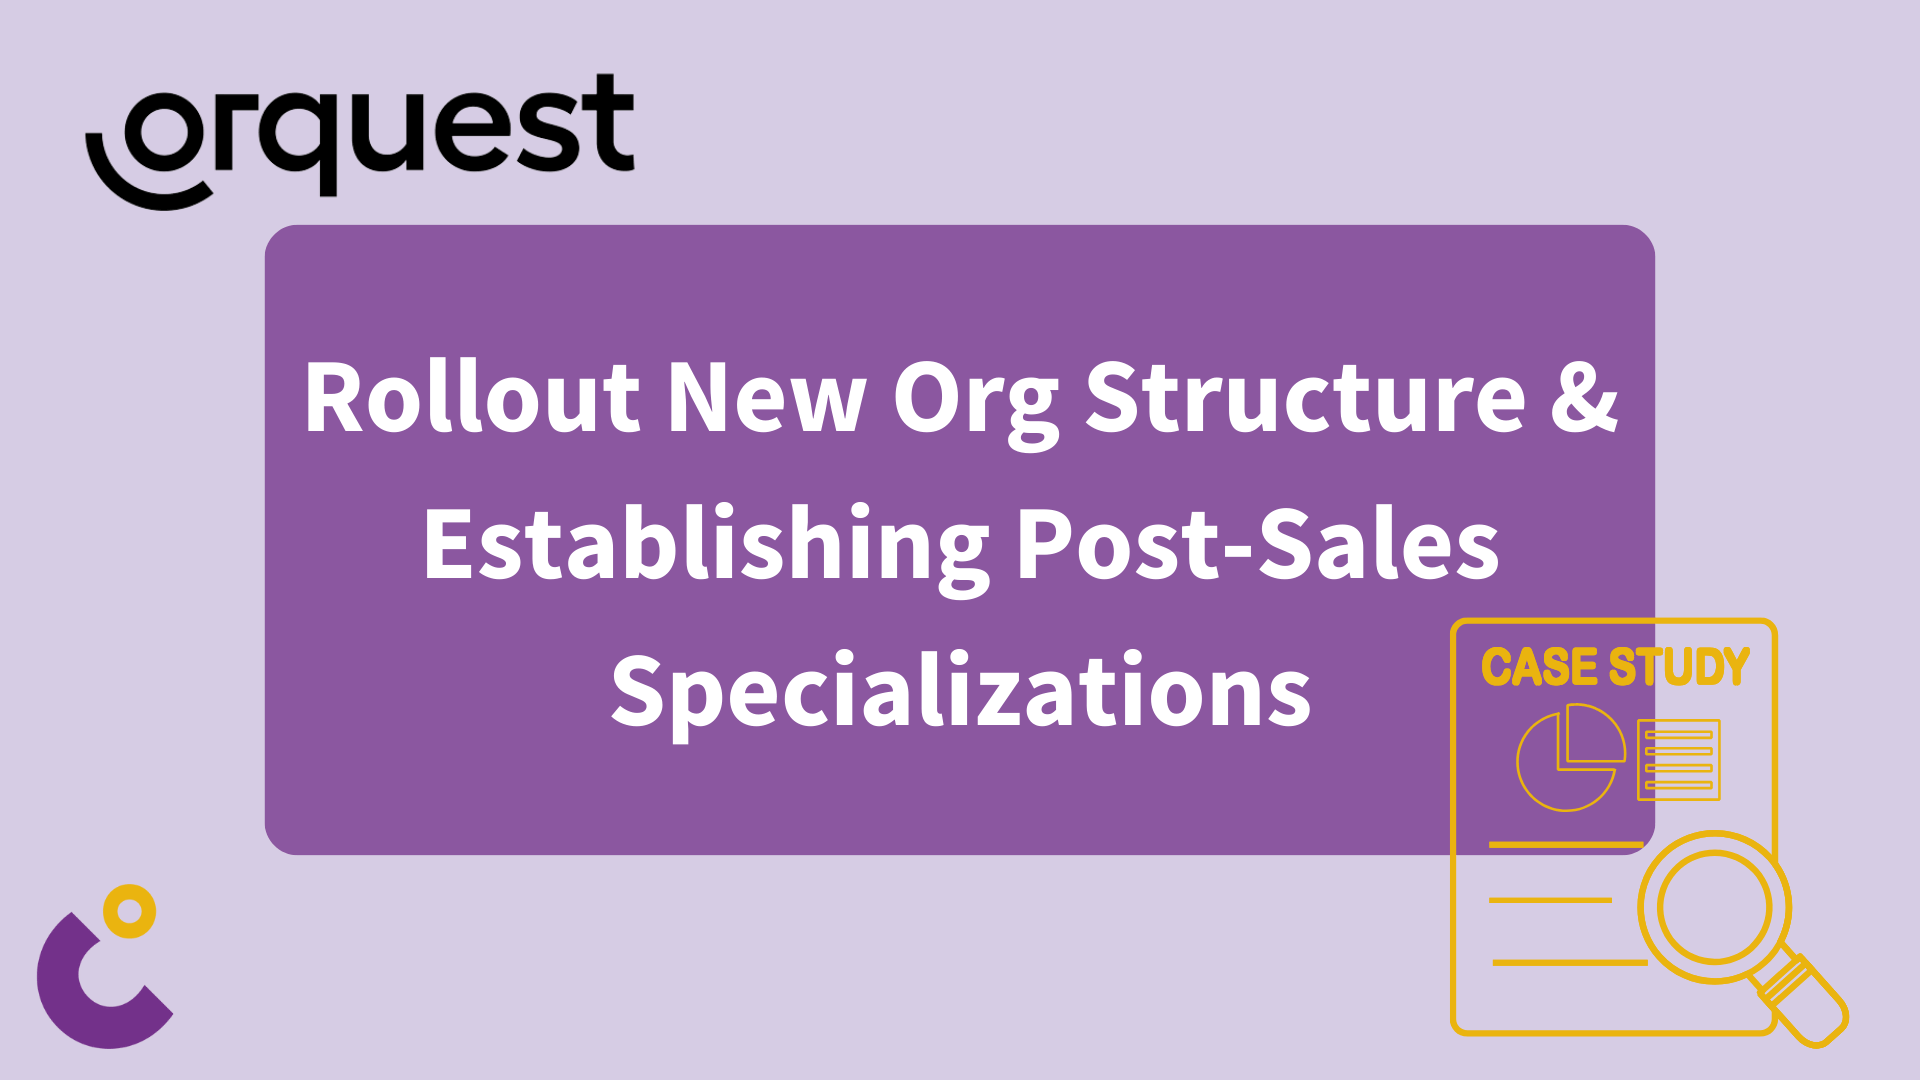 Case Study Orquest - Rollout New Org Structure & Establishing Post-Sales Specializations